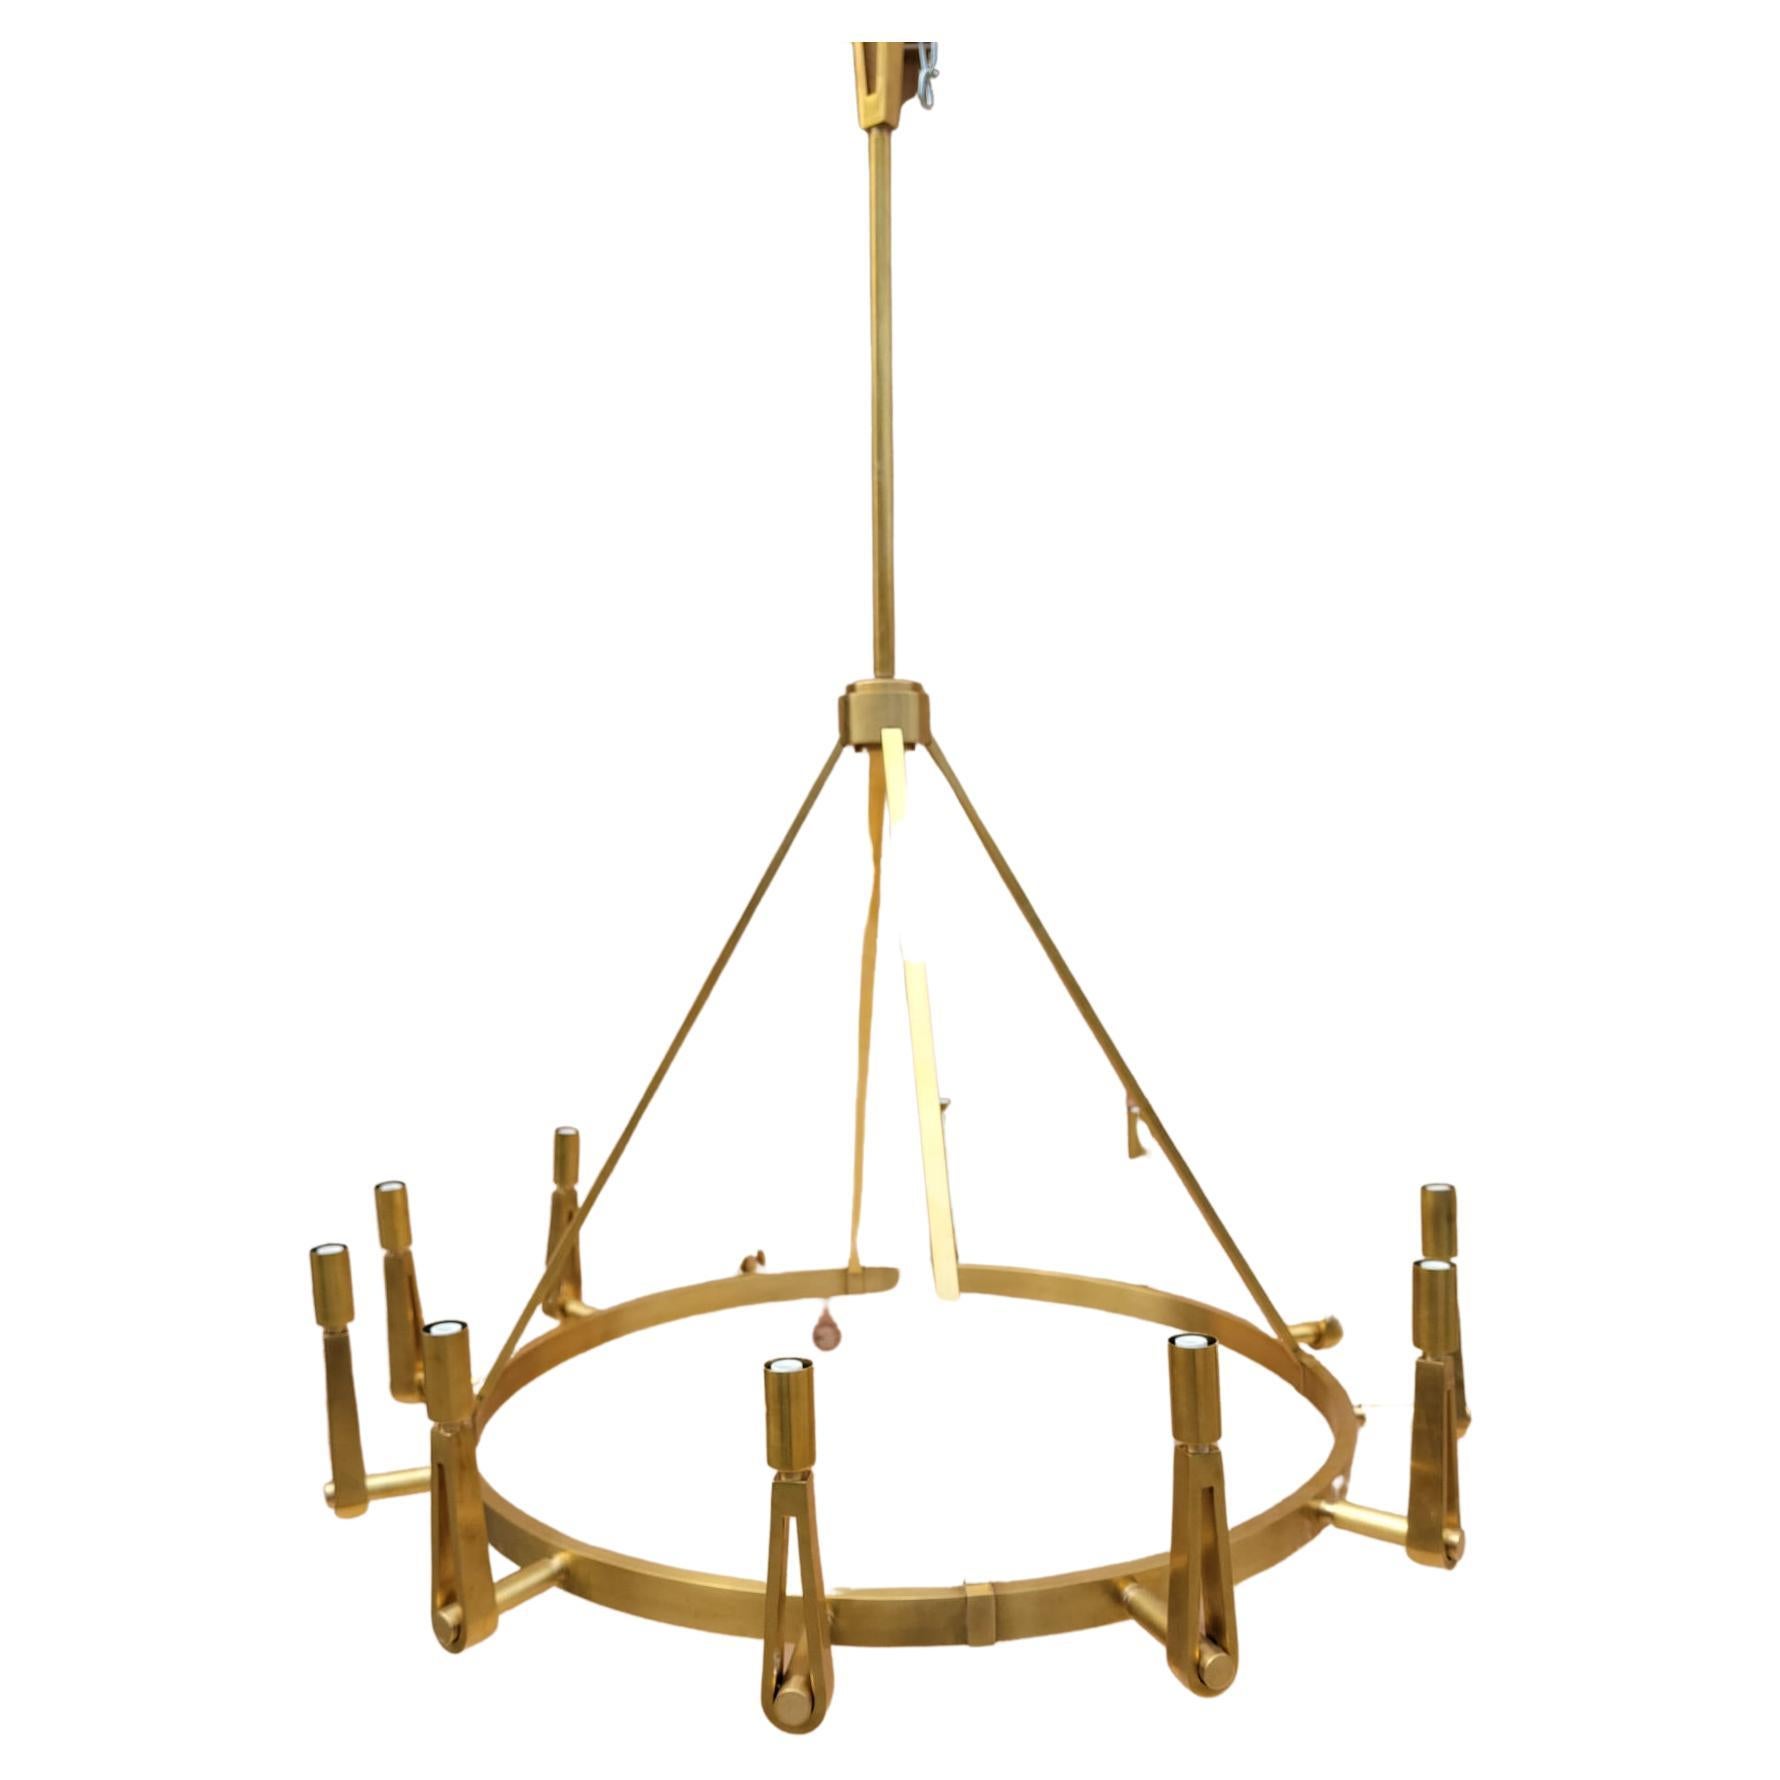 Alpha chandelier by Thomas O'Brien for Visual Comfort & Co.

The Alpha chandelier is a piece of transitional lighting design from Thomas O’Brien for Visual Comfort & Co. Thomas is a creative known for the blend of new and old in his designs. The